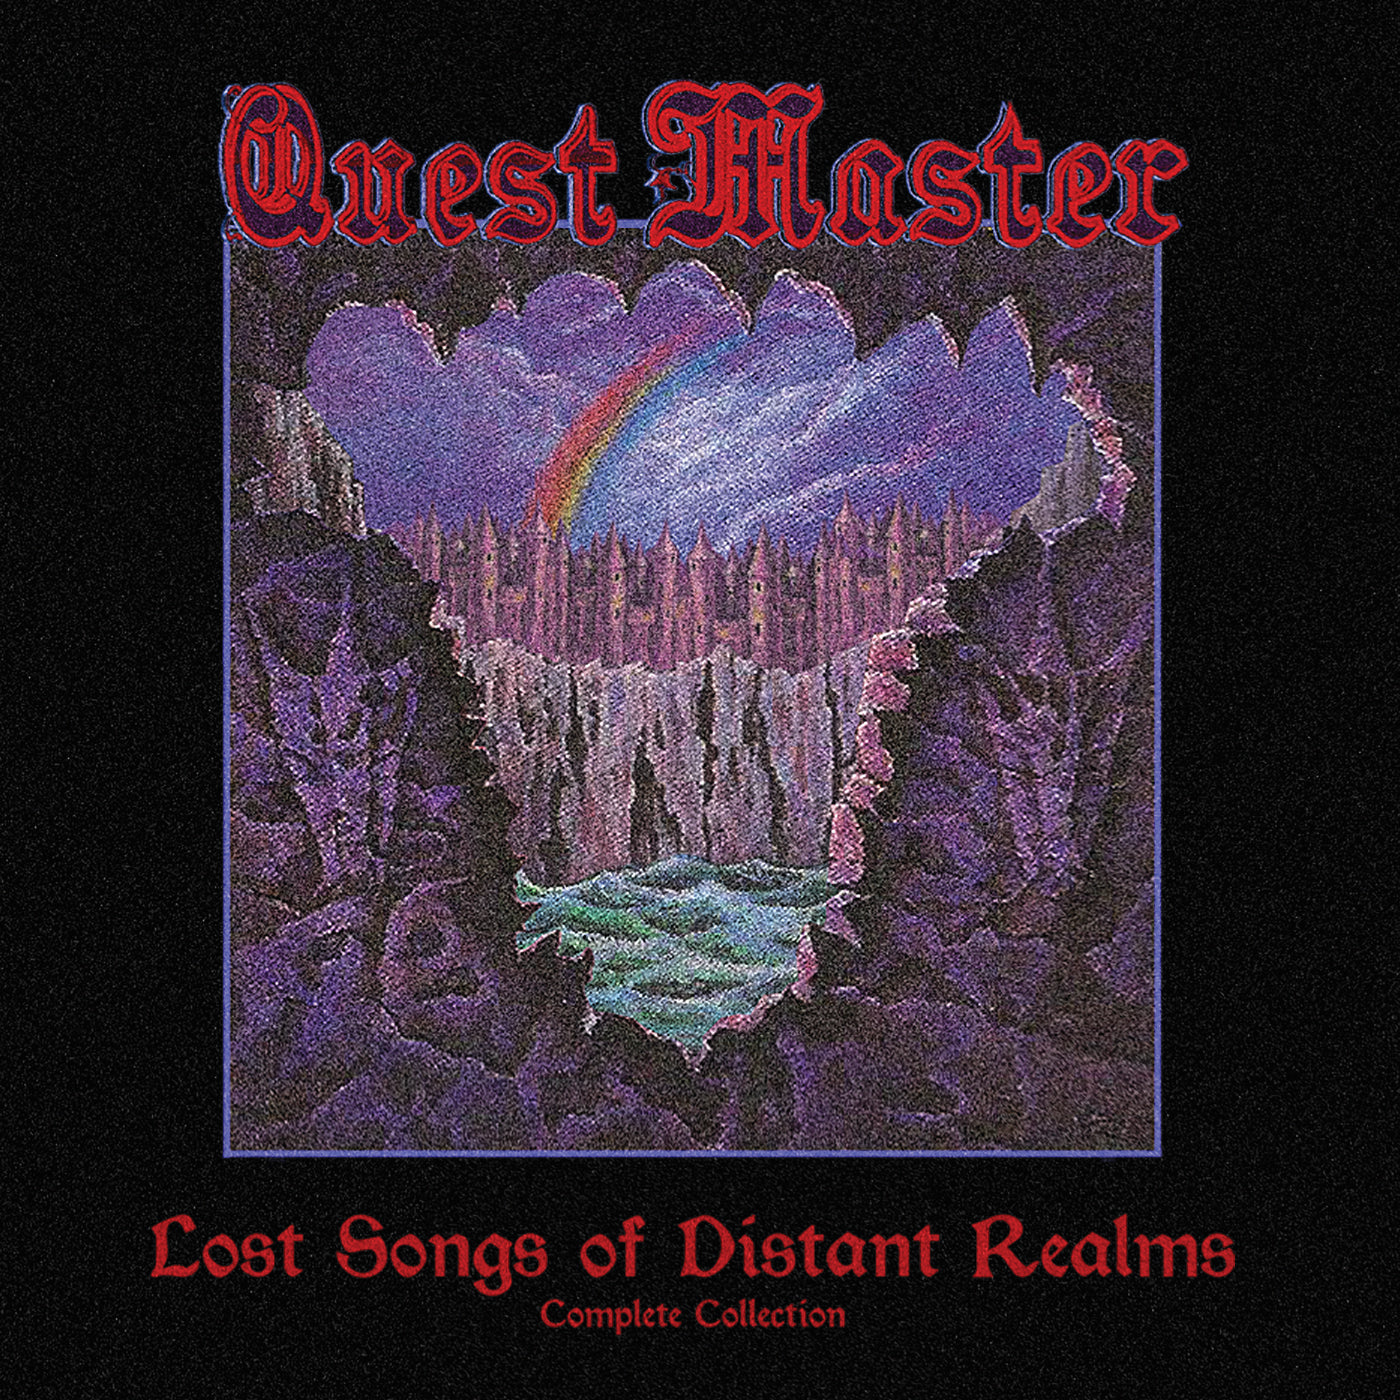 QUEST MASTER "Lost Songs of Distant Realms" 2xCD [Digipak, 3rd press]